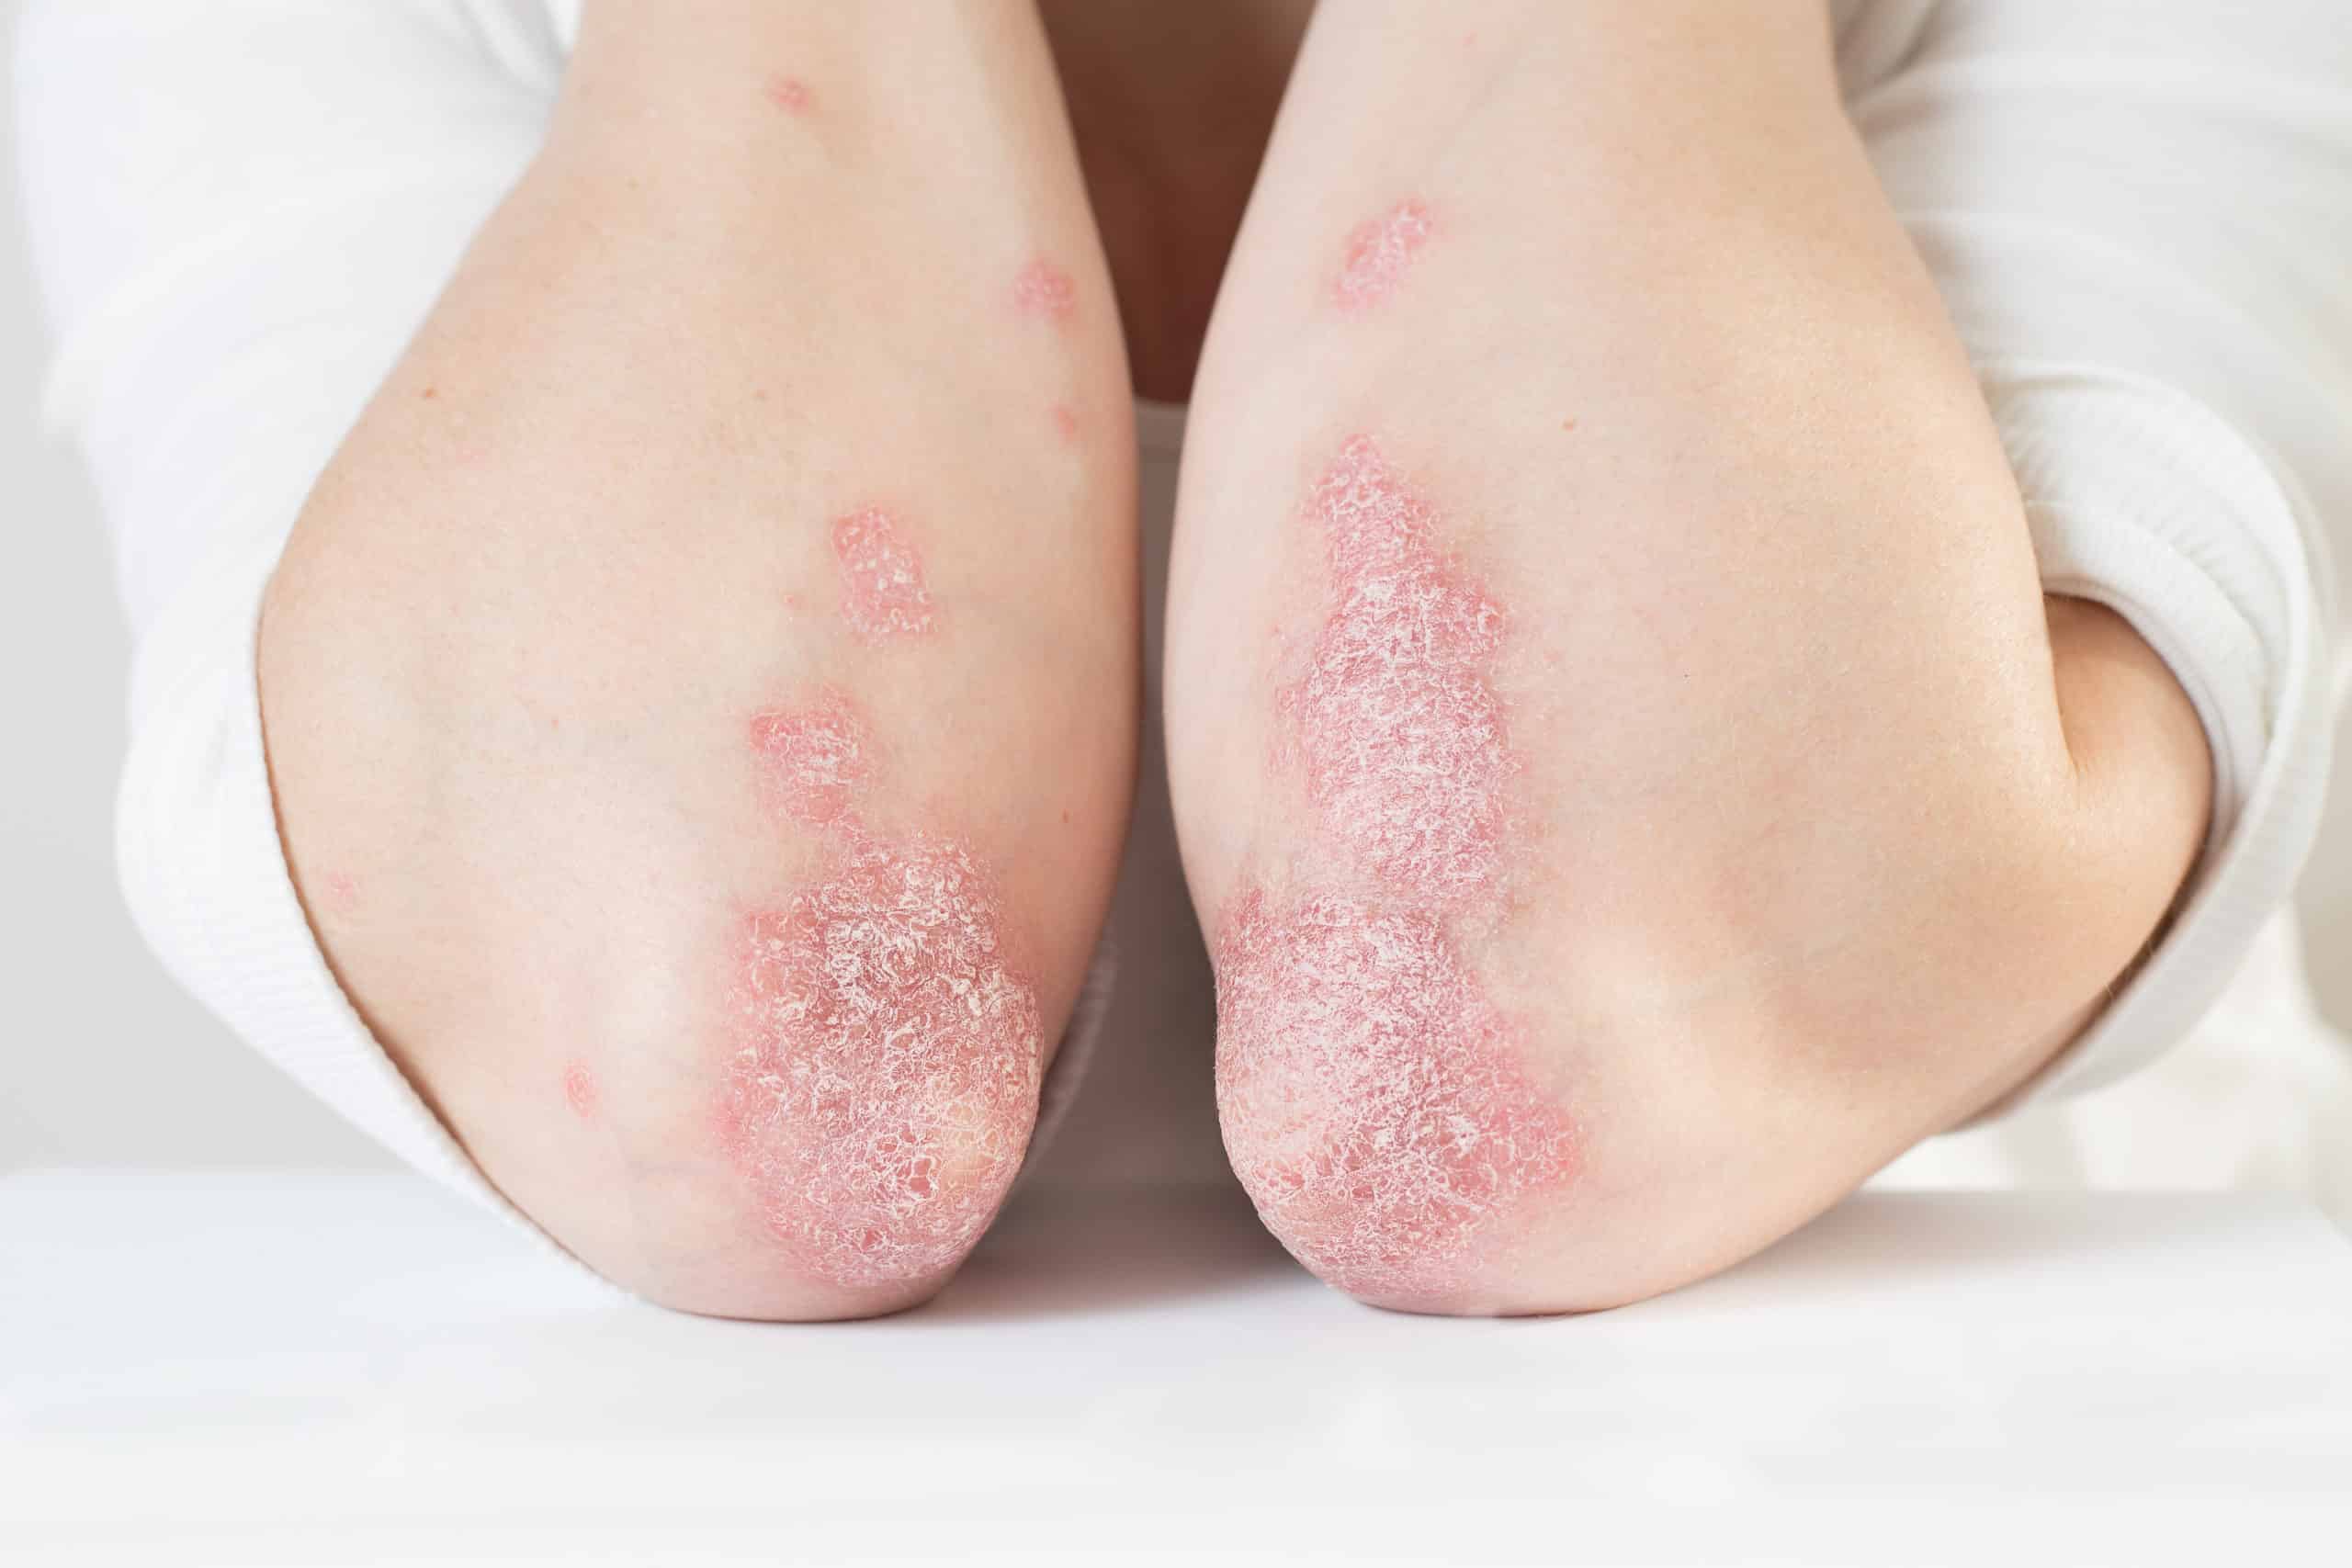 Acute psoriasis on the elbows is an autoimmune incurable dermatological skin disease. Large red, inflamed, flaky rash on the knees. Joints affected by psoriatic arthritis